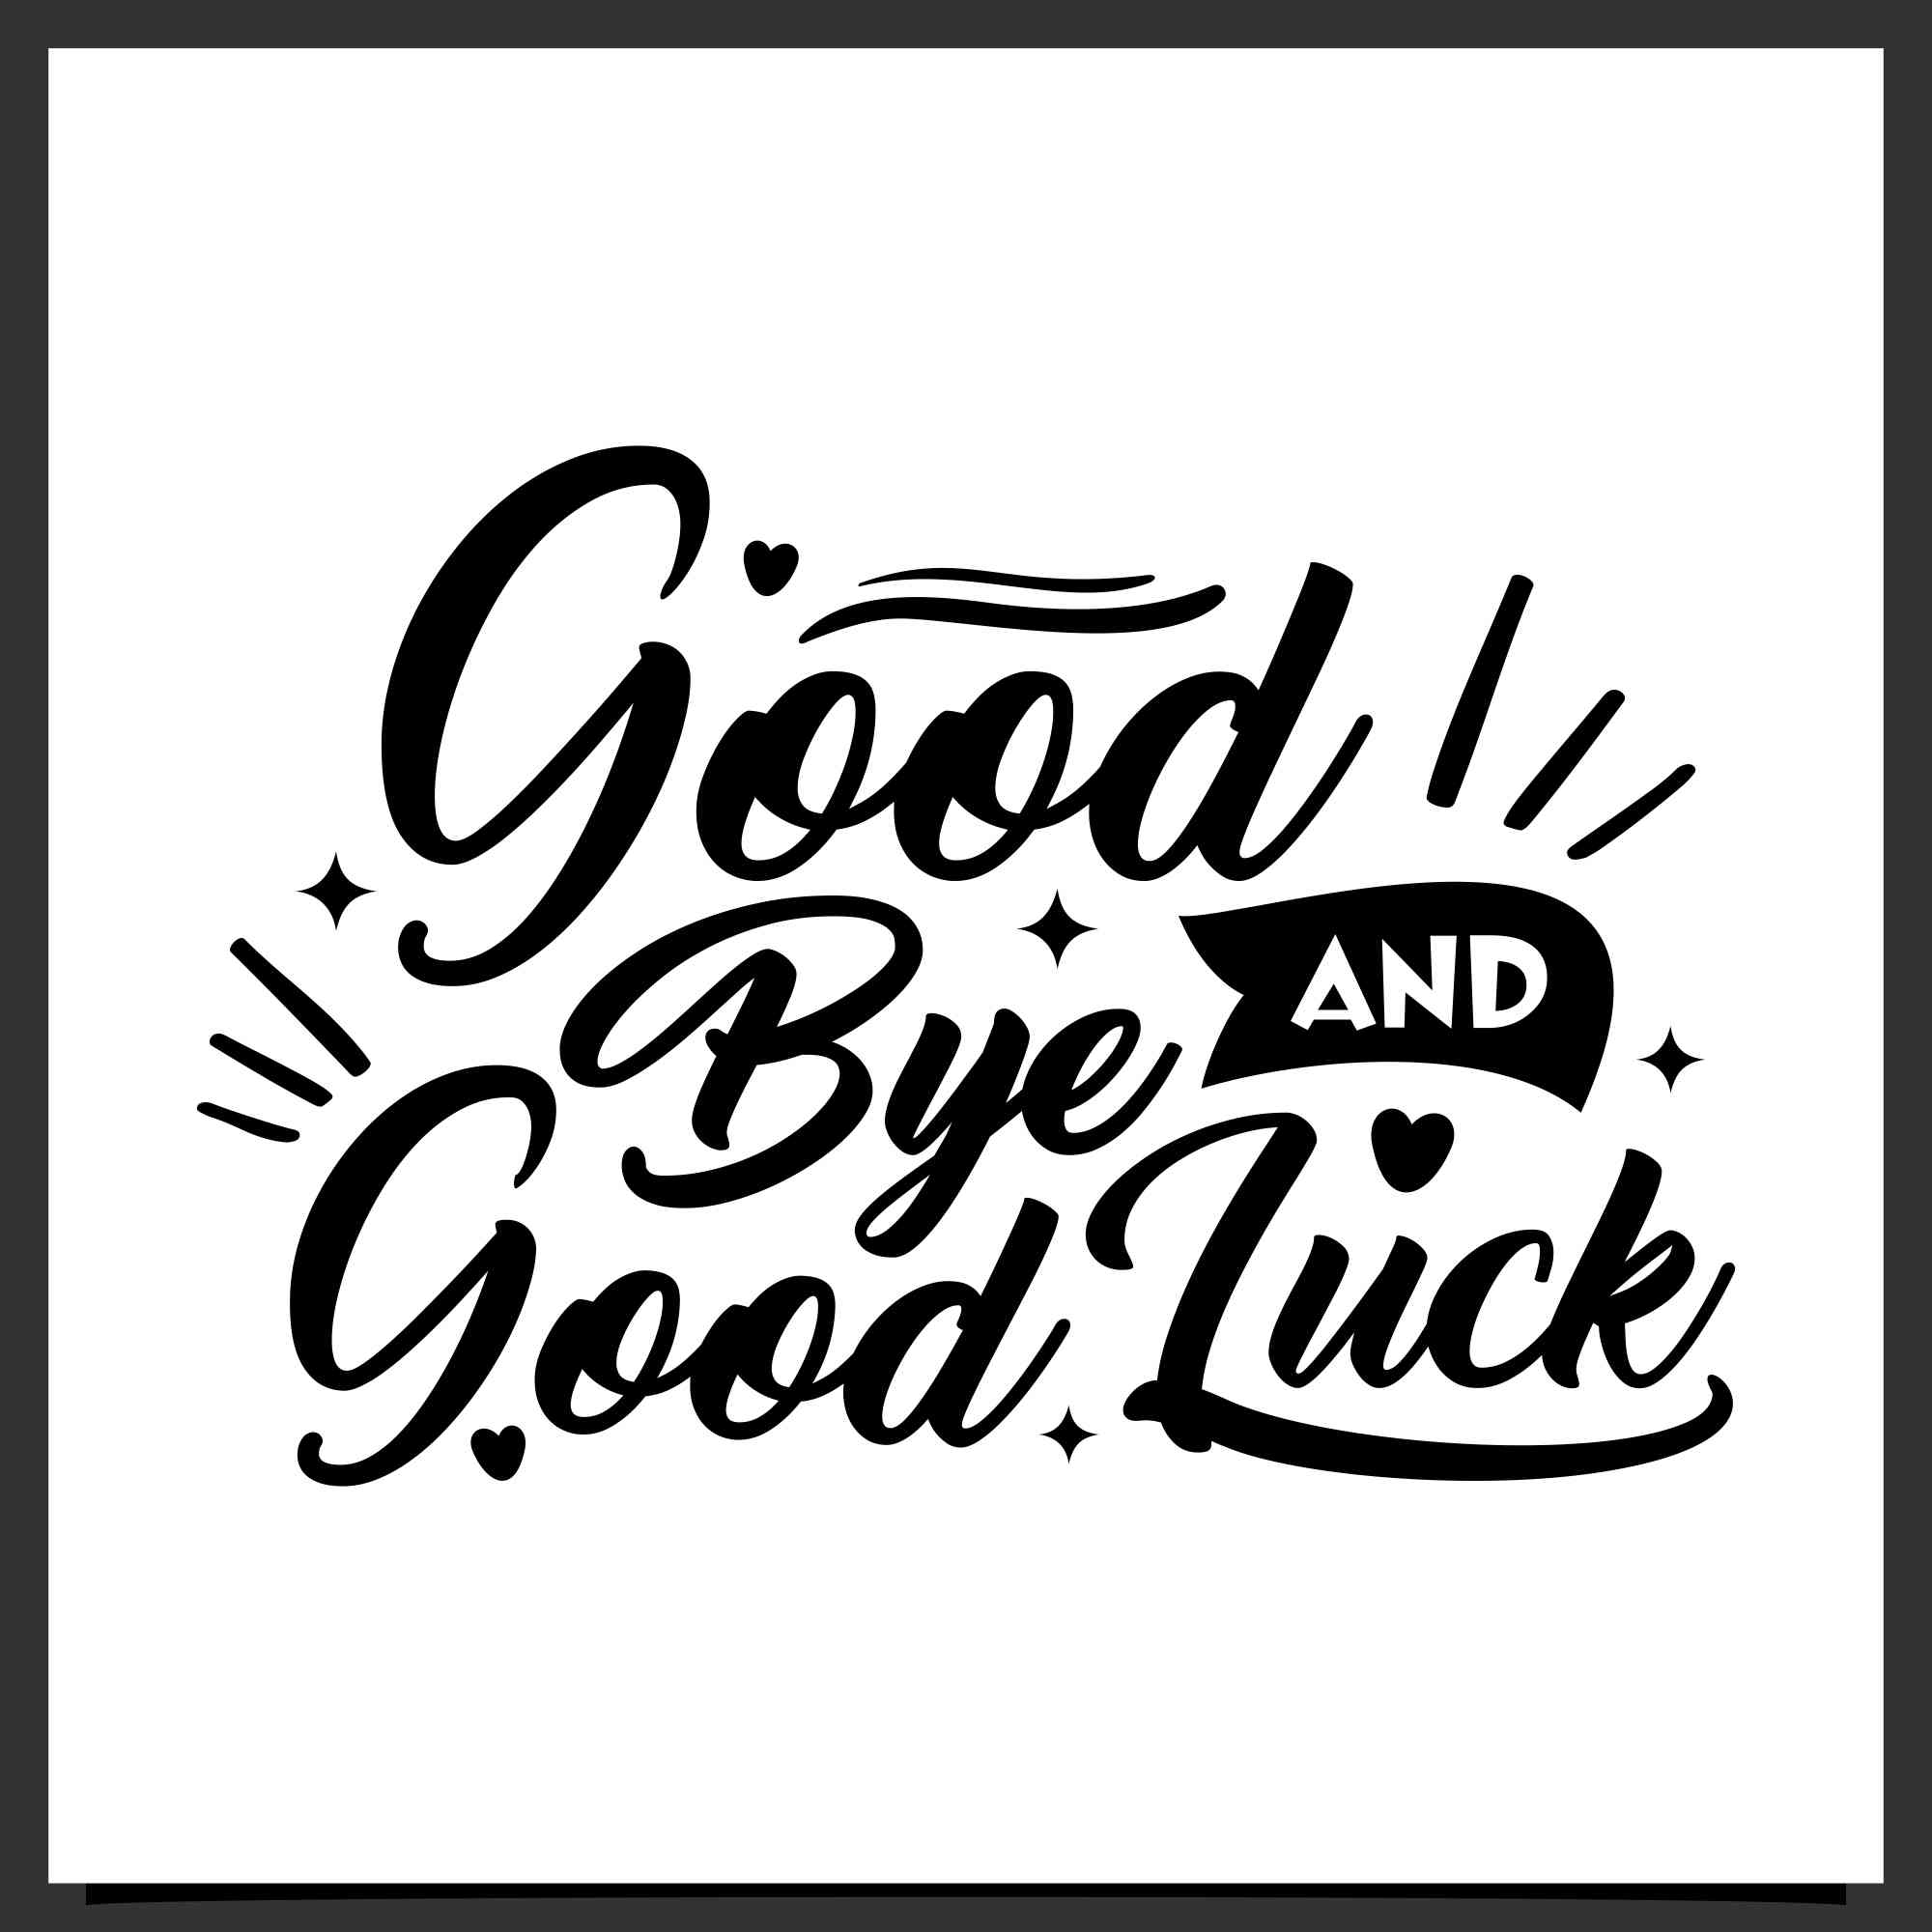 Set Good bye and Good Luck lettering collection - $6 preview image.